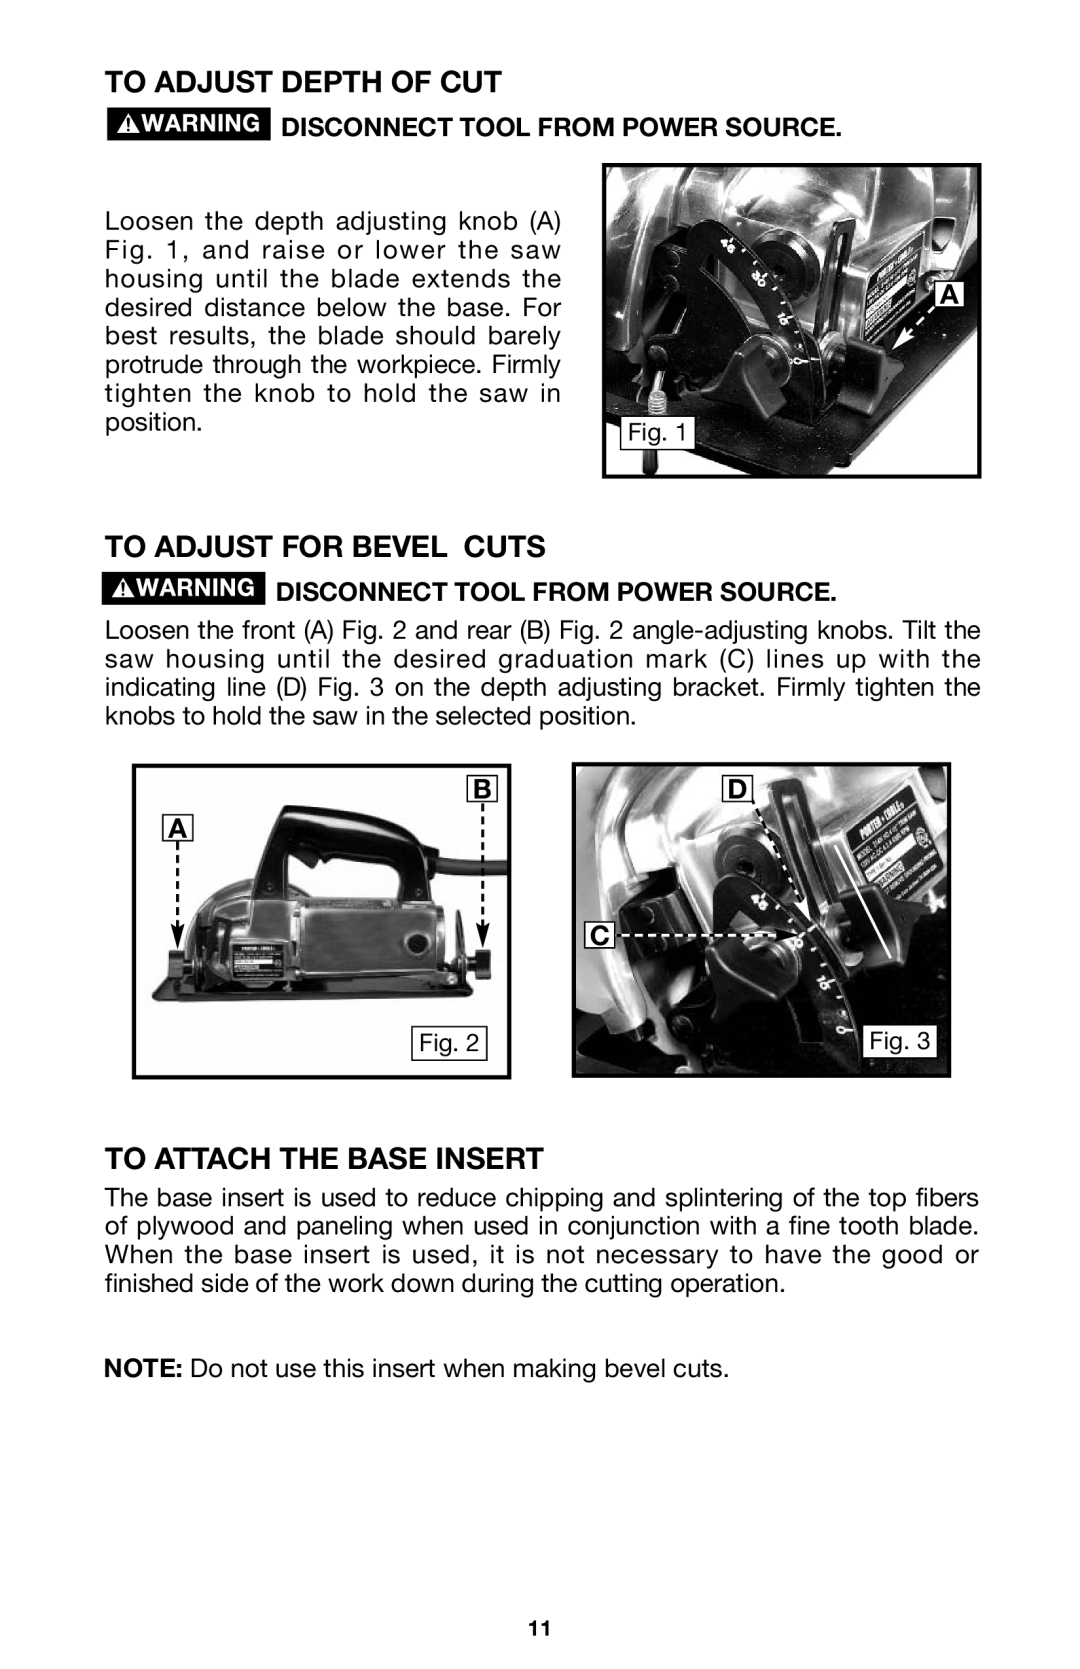 PYLE Audio 314 instruction manual To Adjust Depth Of Cut, To Adjust For Bevel Cuts, To Attach The Base Insert 